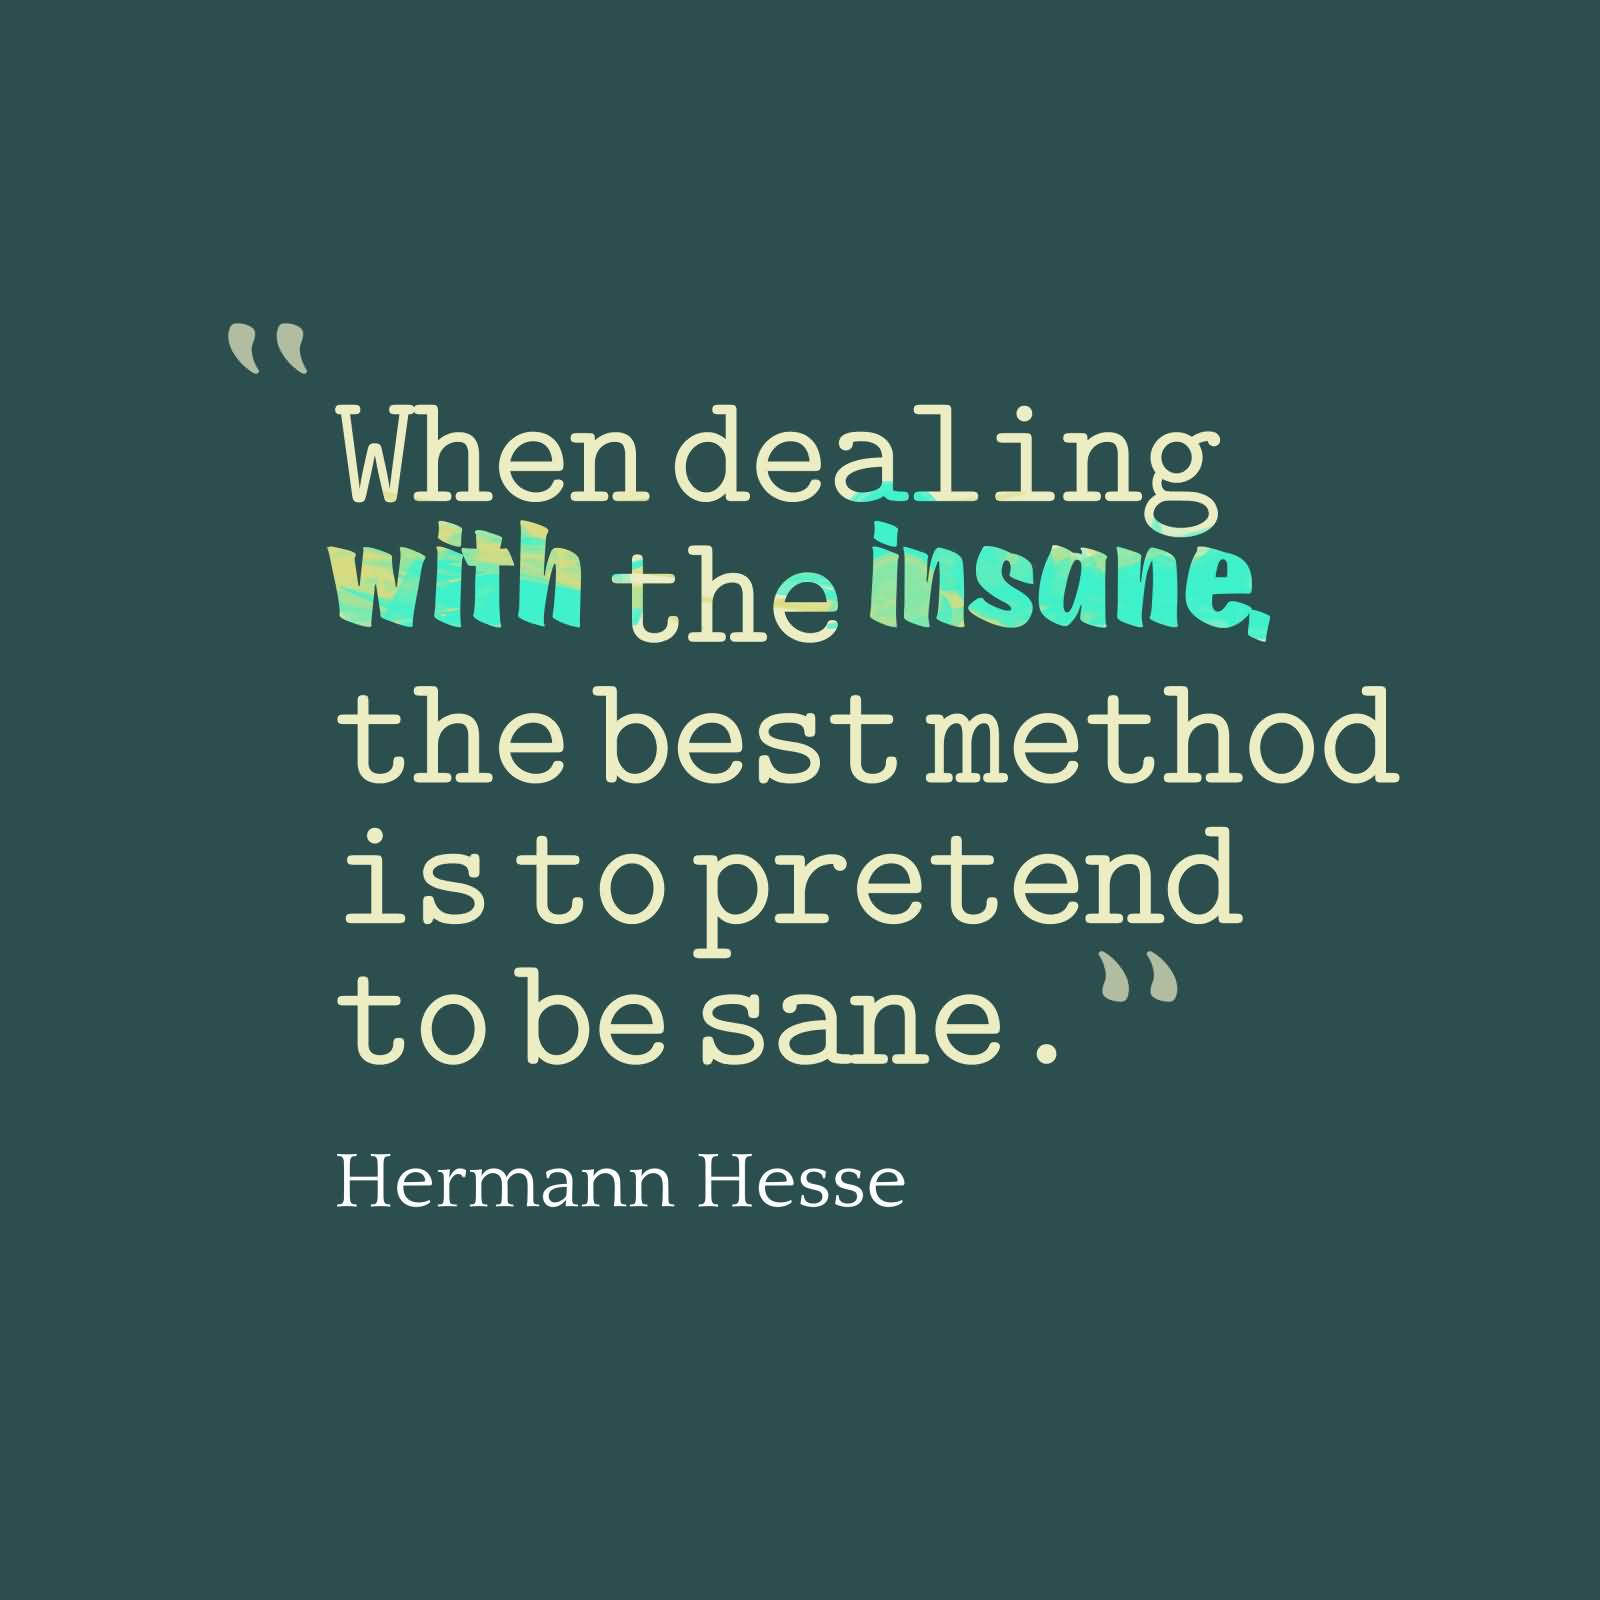 When dealing with the insane, the best method is to pretend to be sane. Hermann Hesse